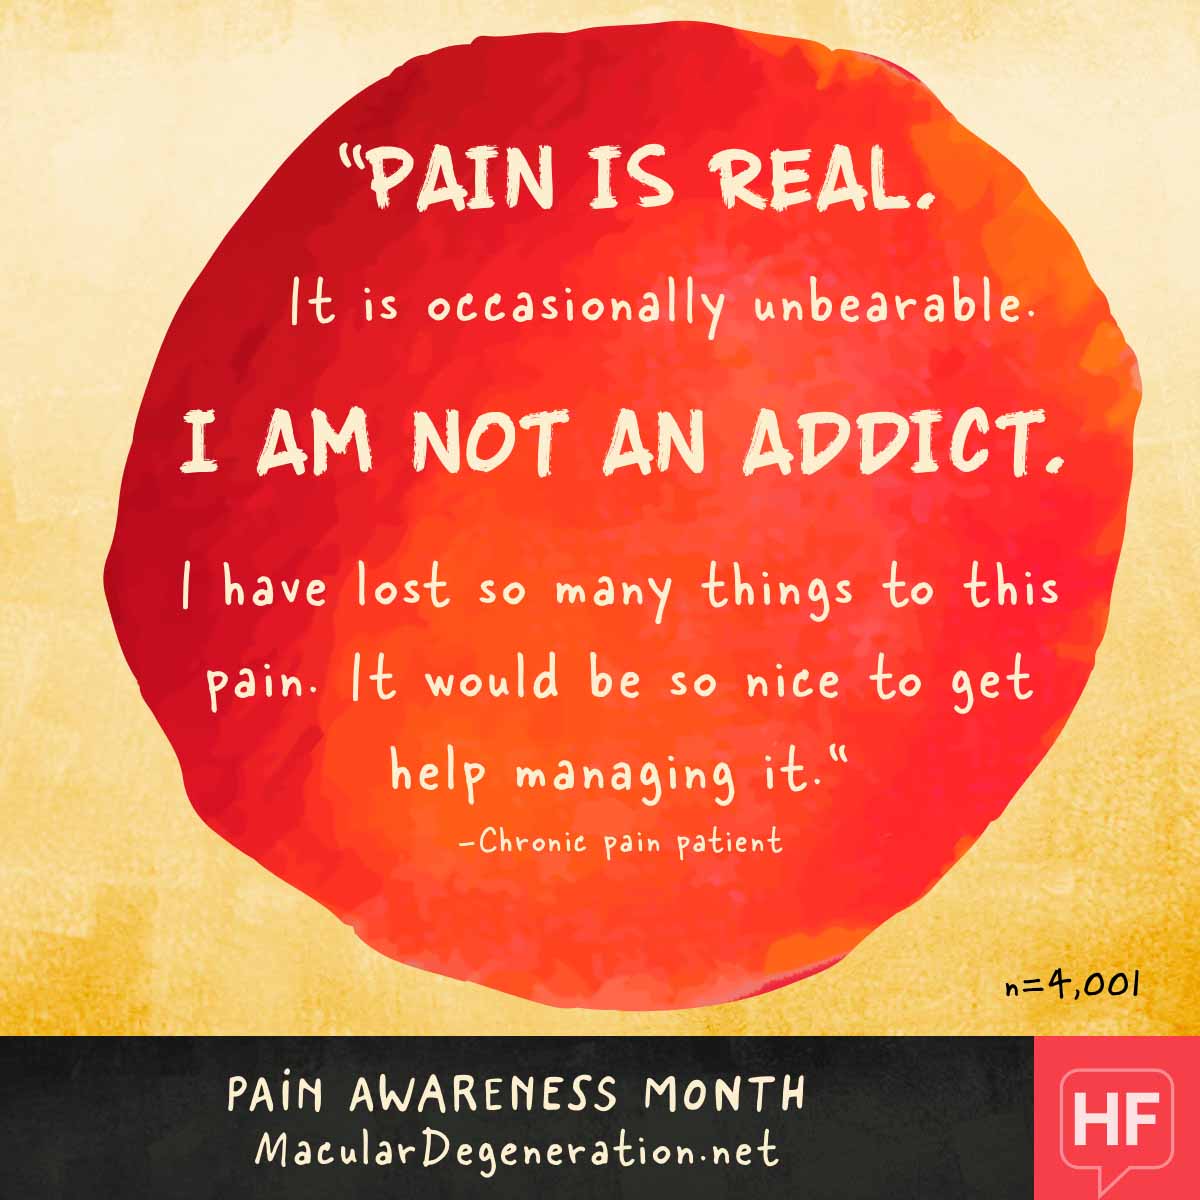 Quote describing pain as real, unbearable, and life changing. They are not an addict and just want help with the pain